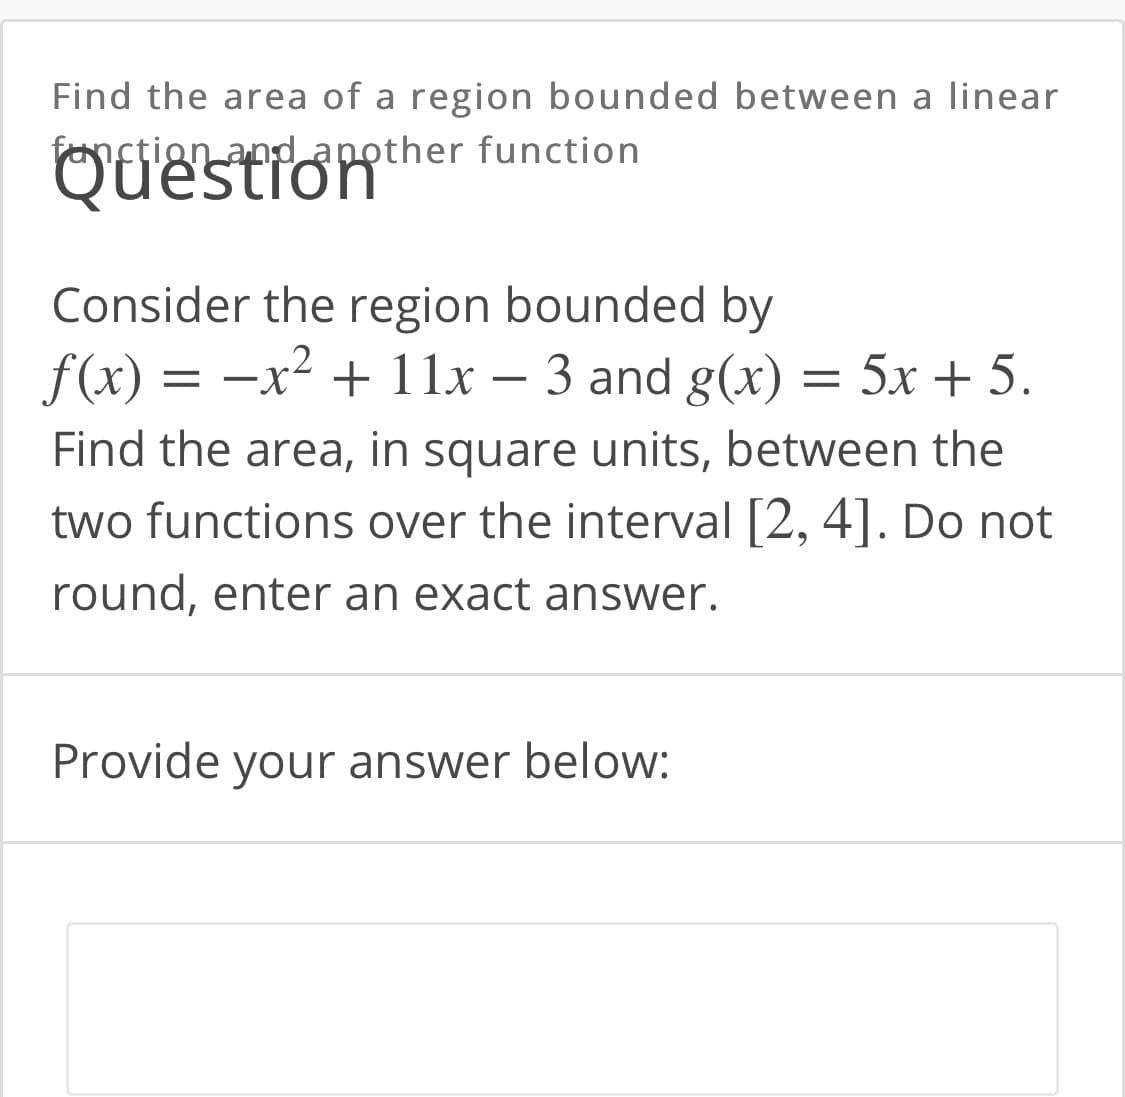 Find the area of a region bounded between a linear
fanction and another function
Consider the region bounded by
f(x) = –x² + 11x – 3 and g(x)
= 5x + 5.
Find the area, in square units, between the
two functions over the interval [2, 4]. Do not
round, enter an exact answer.
Provide your answer below:
